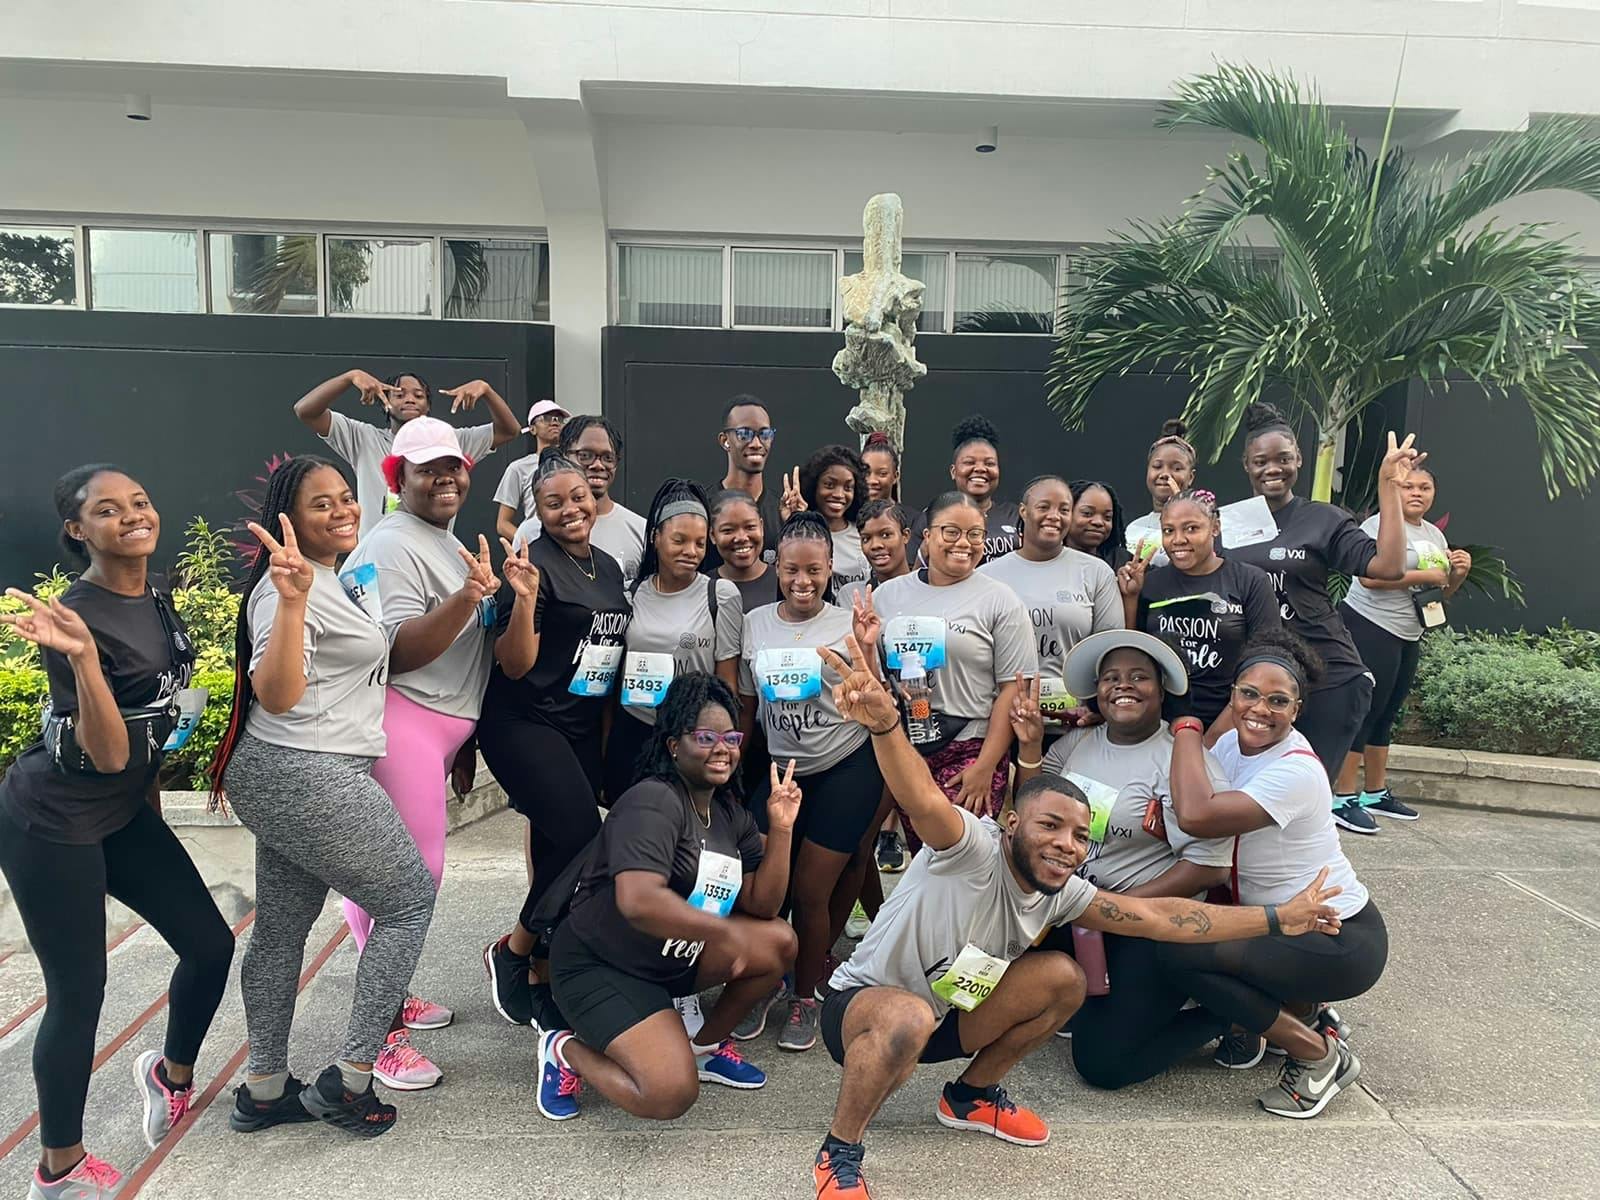 Employees from Team Jamaica posing for a group shot at an employee event.